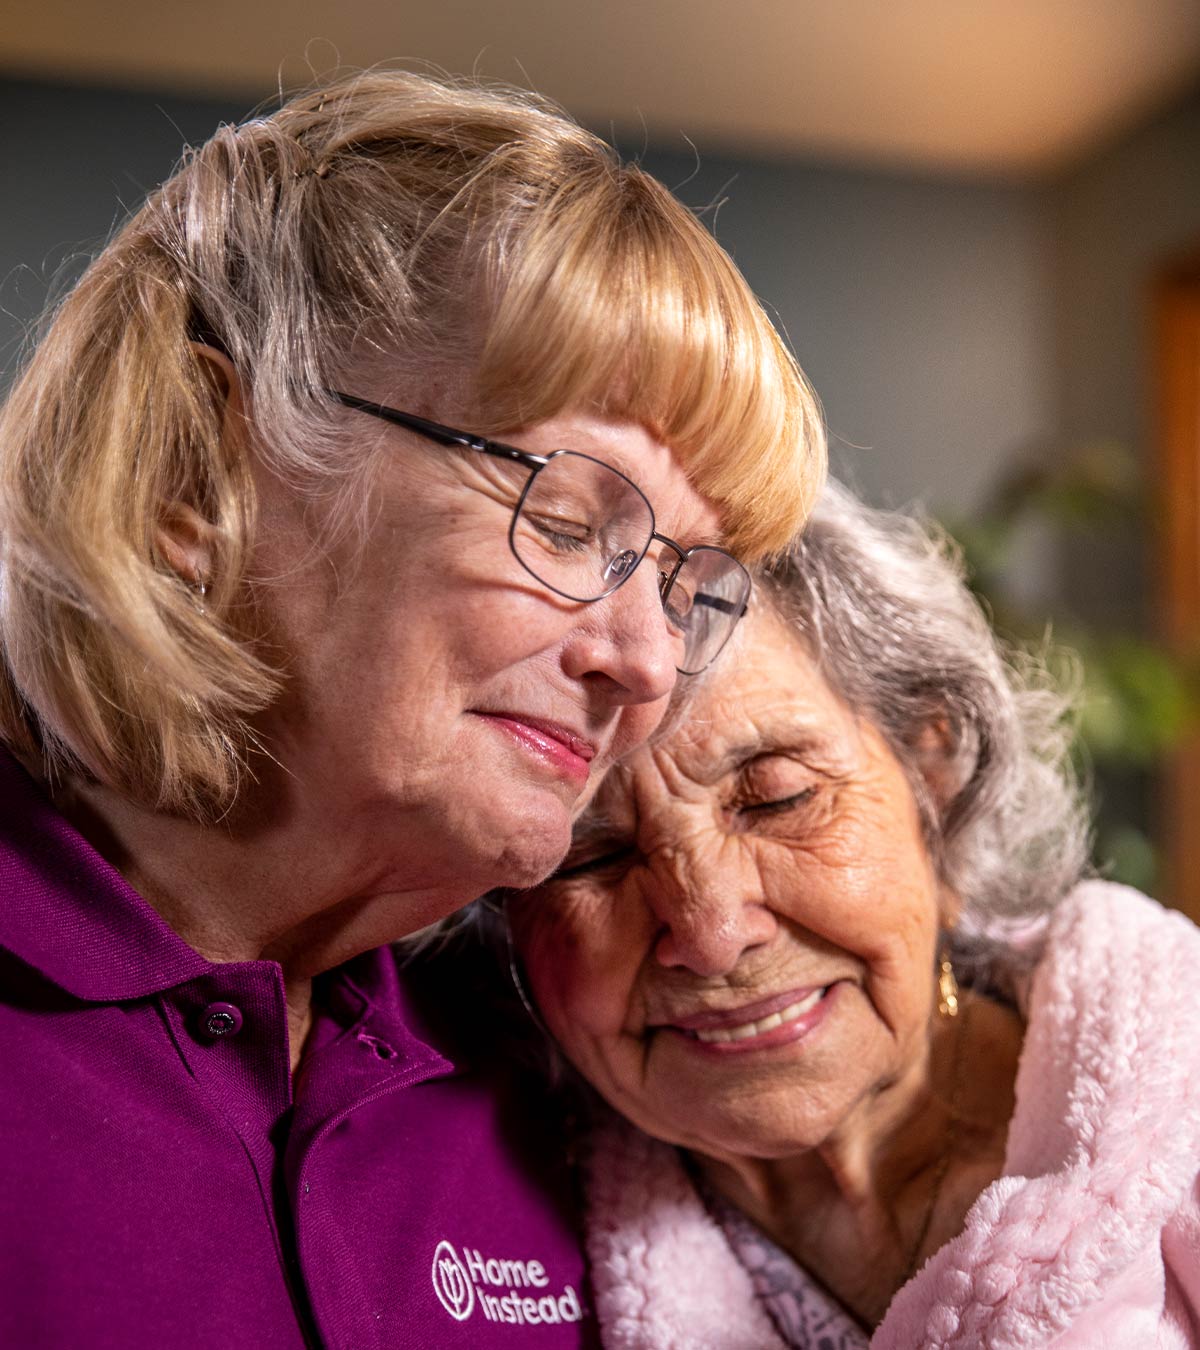 CAREGiver providing in-home senior care services. Home Instead of Sudbury, ON provides Elder Care to aging adults. 